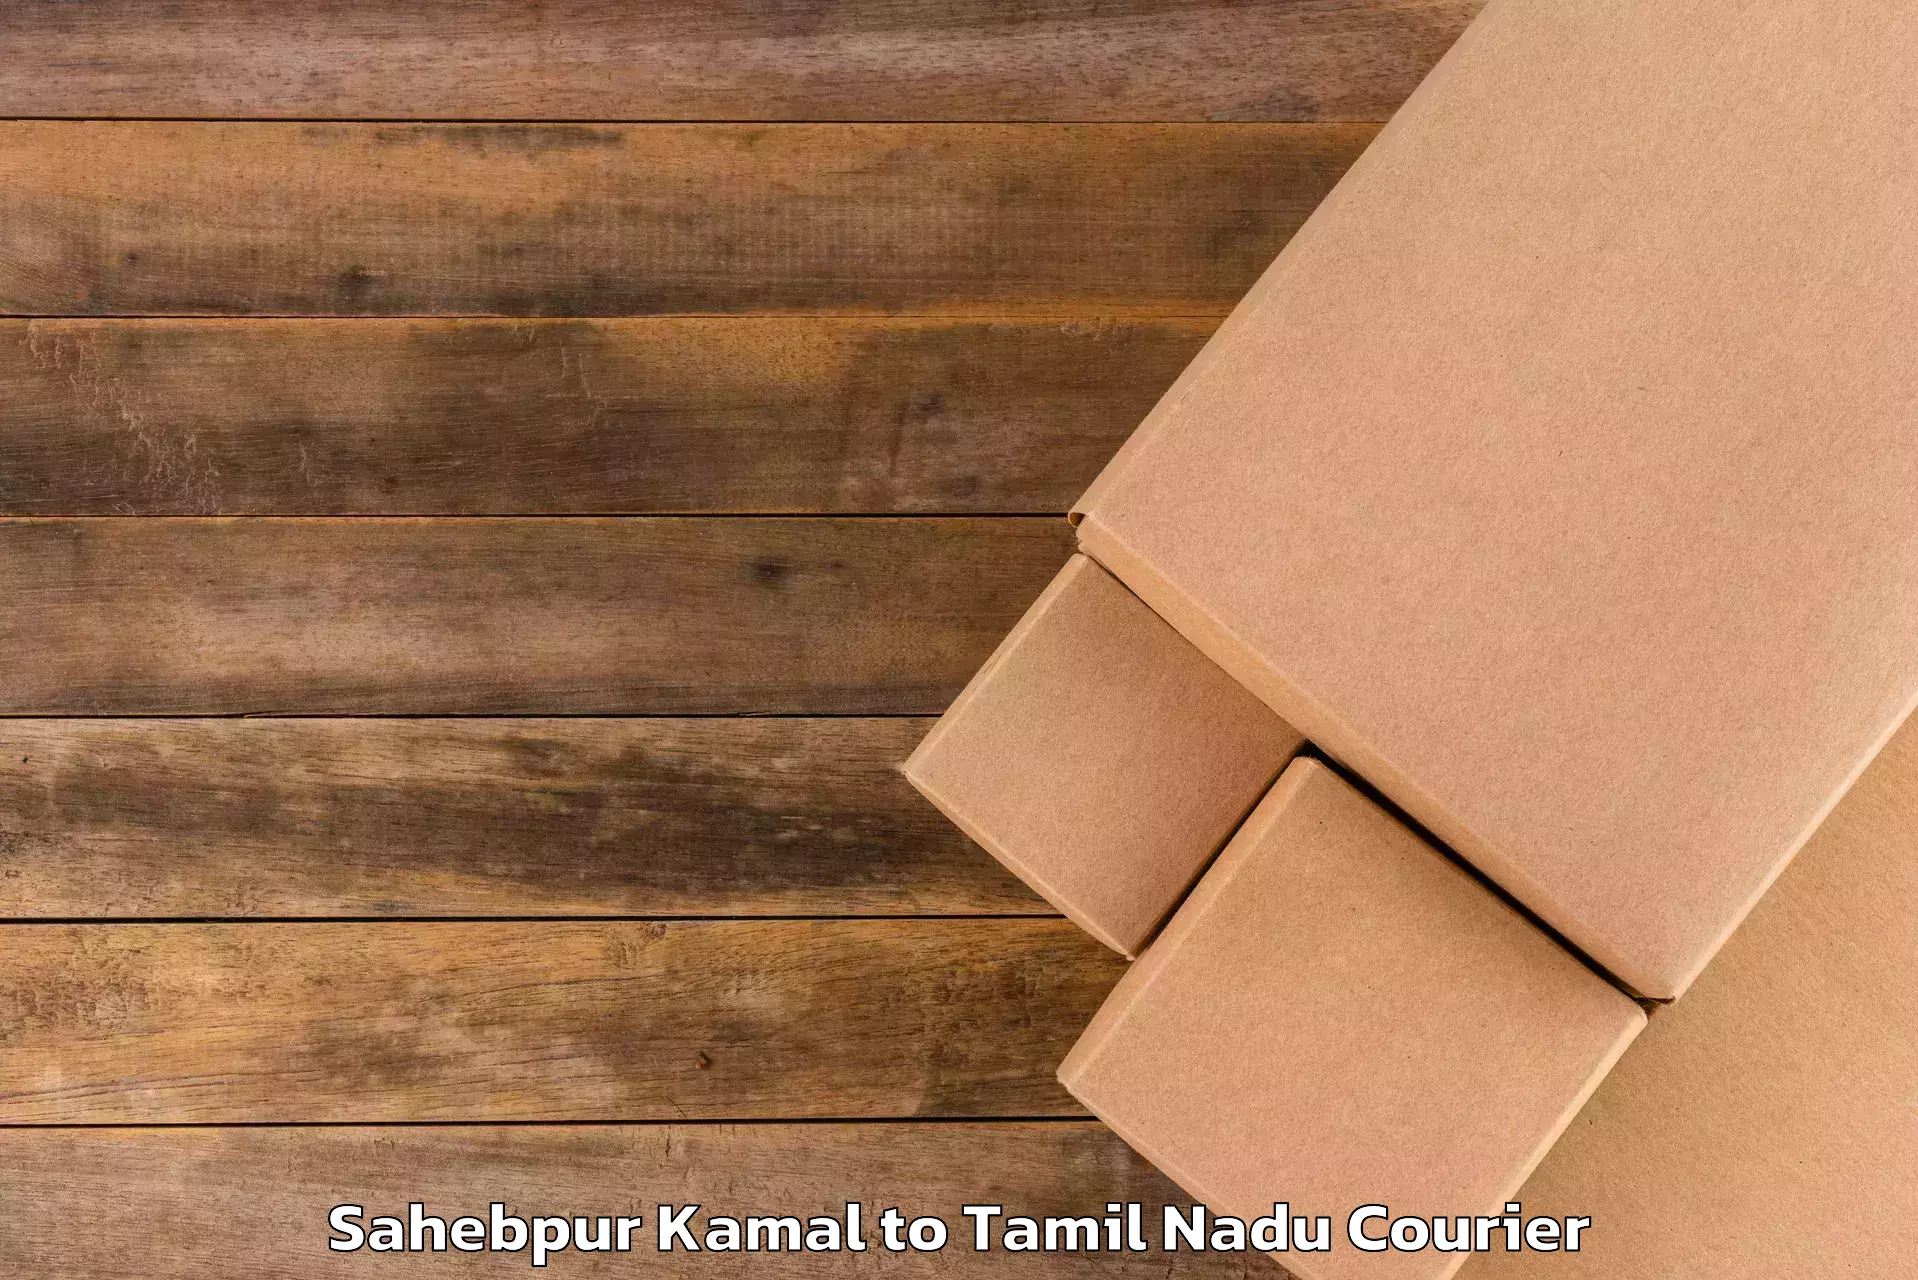 Luggage transport consulting in Sahebpur Kamal to Melur